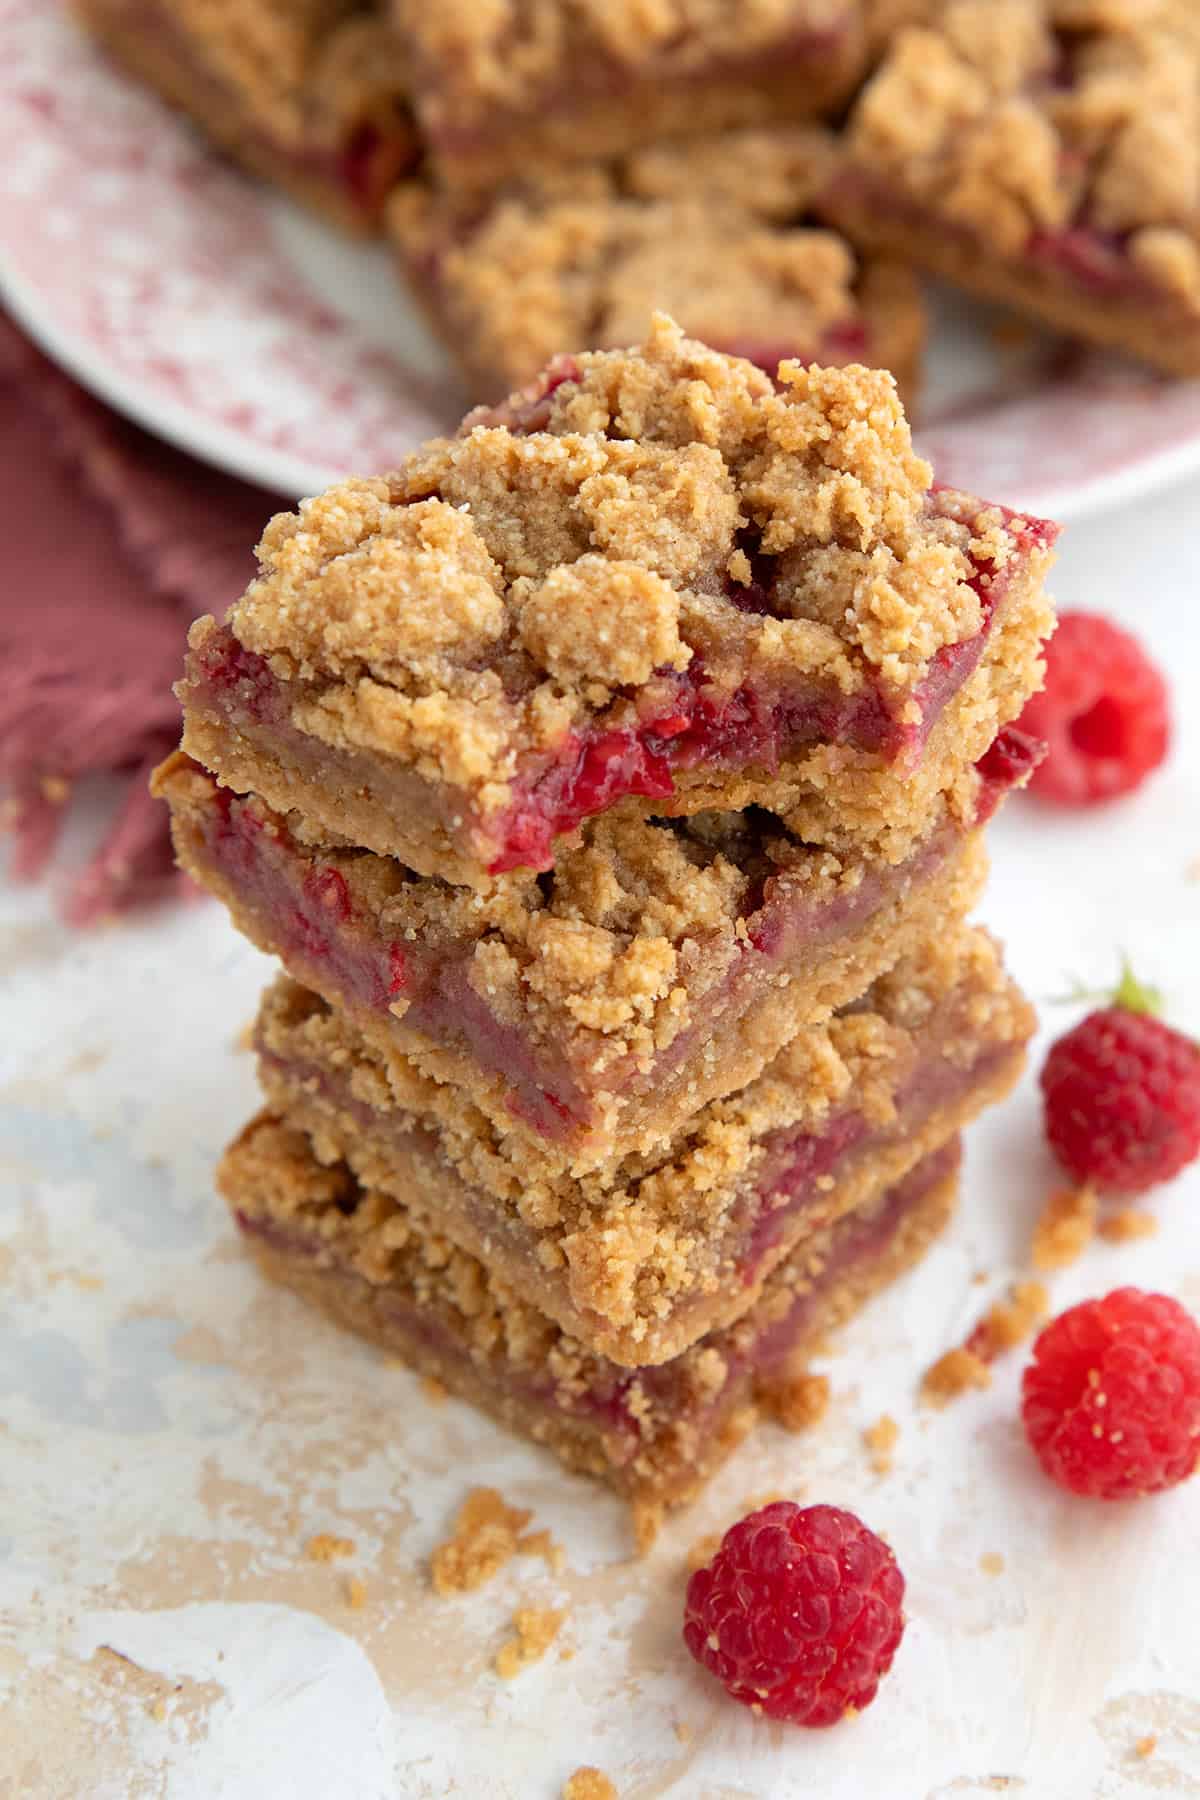 A stack of keto Peanut Butter and Jelly Bars with a bite taken out of the top one.